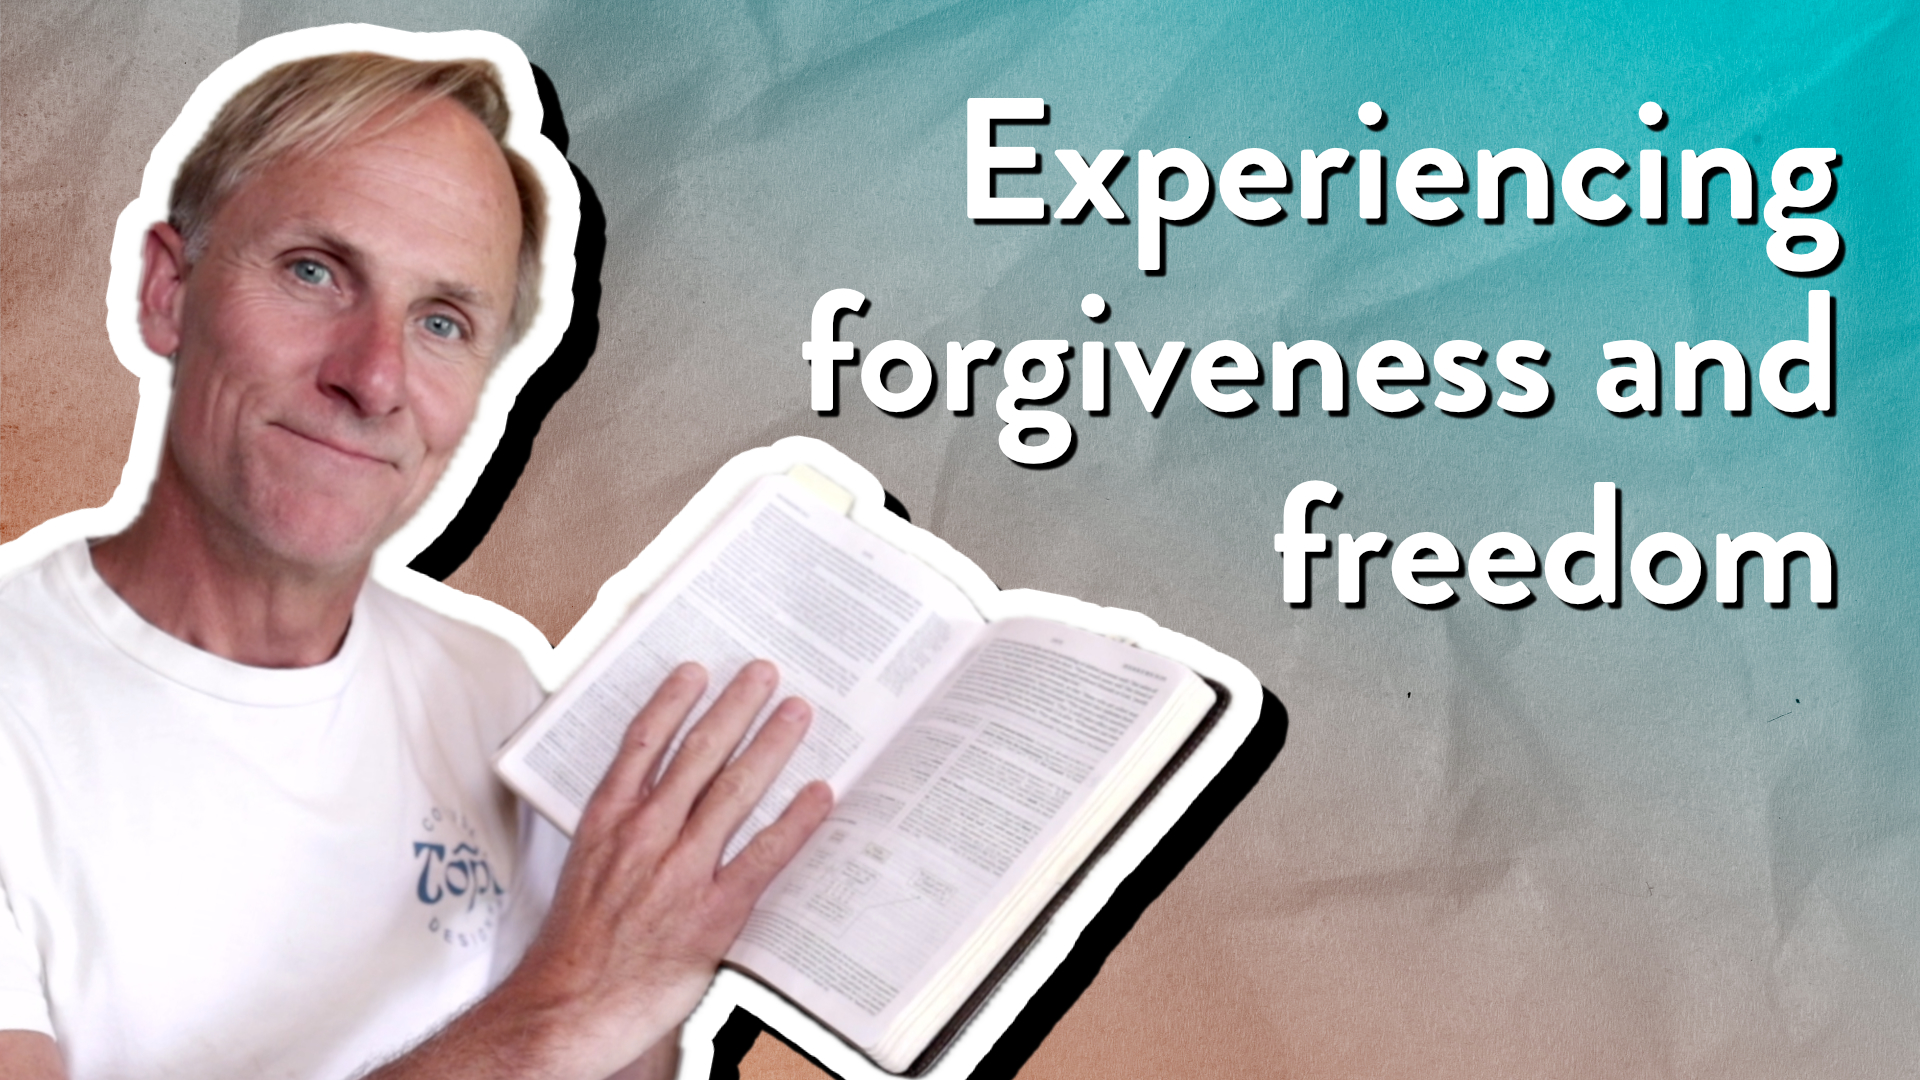 Experiencing forgiveness and freedom